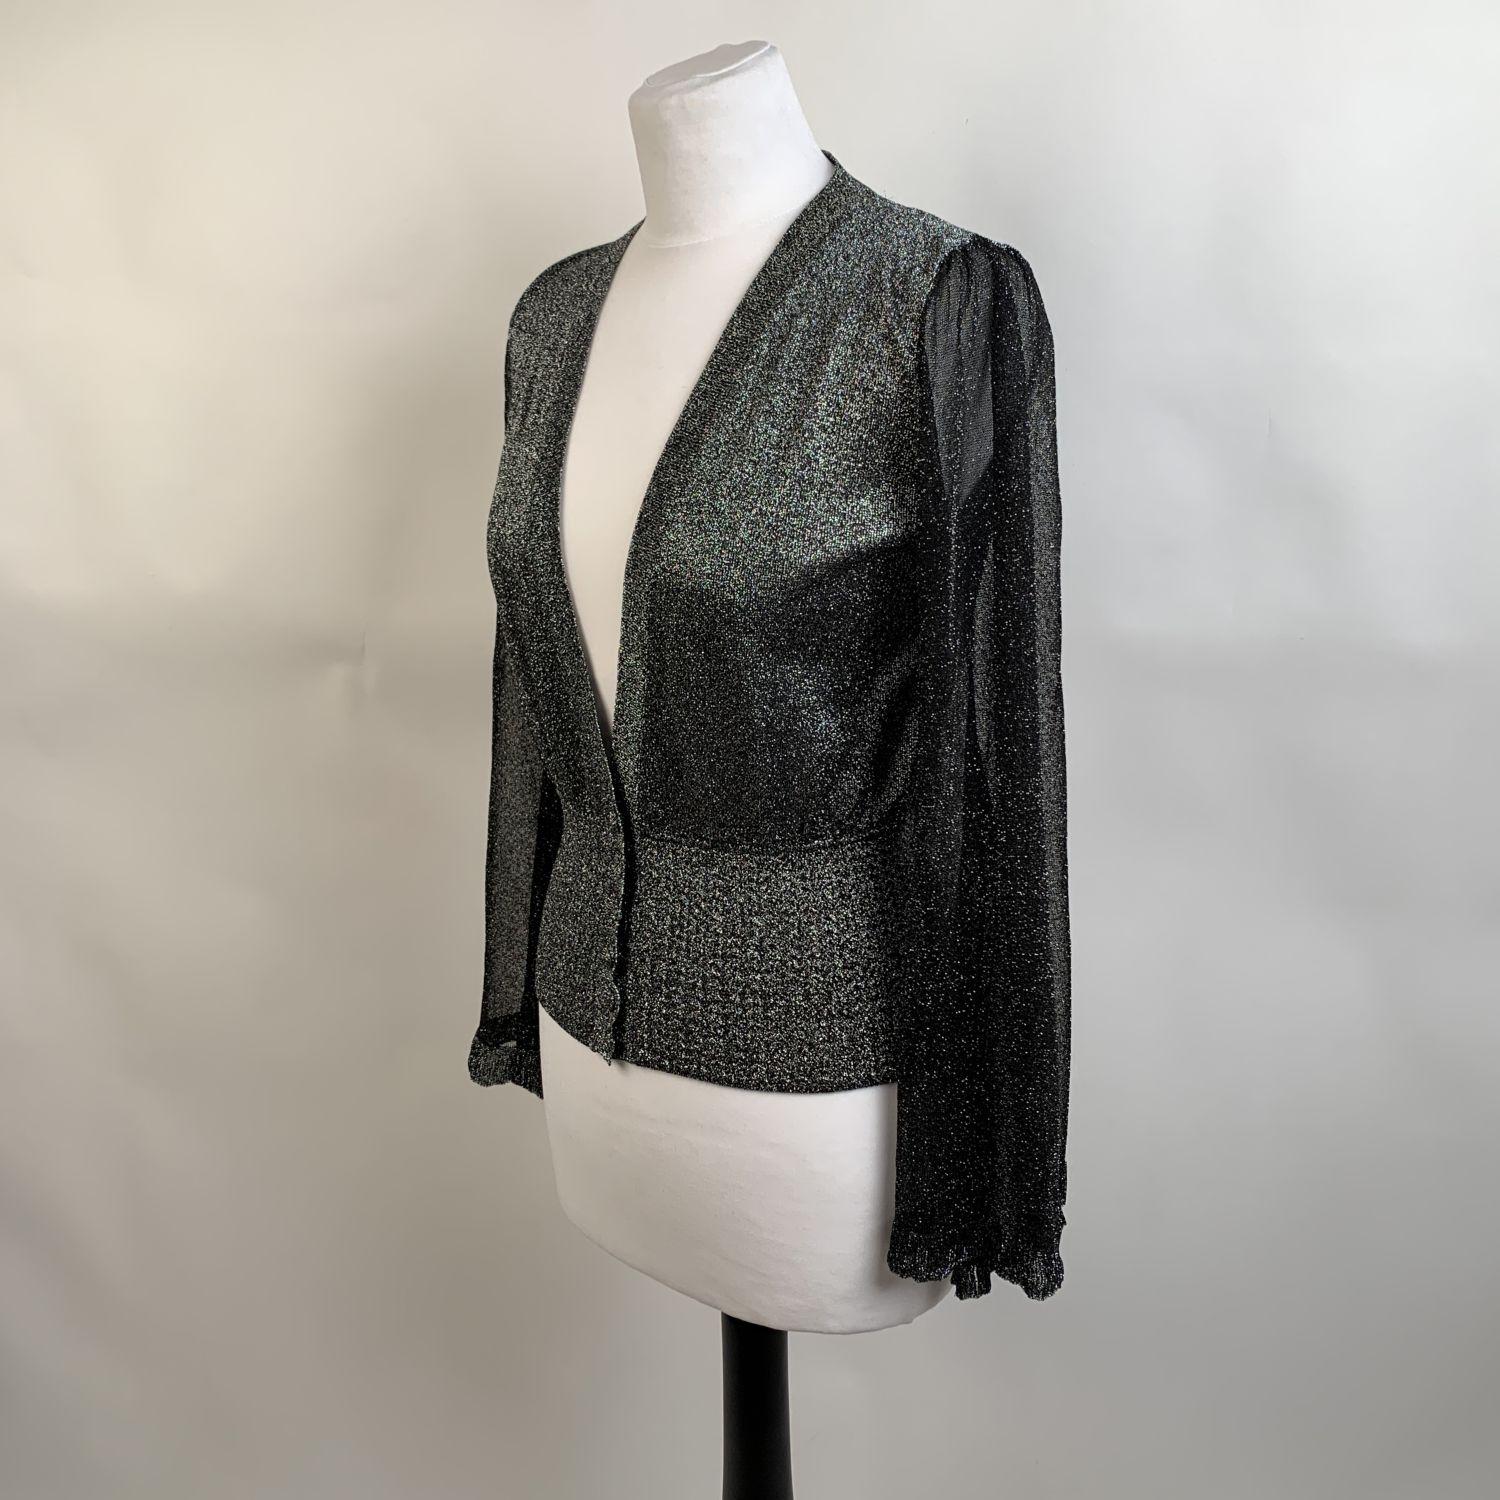 Missoni Silver Tone Lurex Cardigan with Flared Sleeves Size 38 IT 1